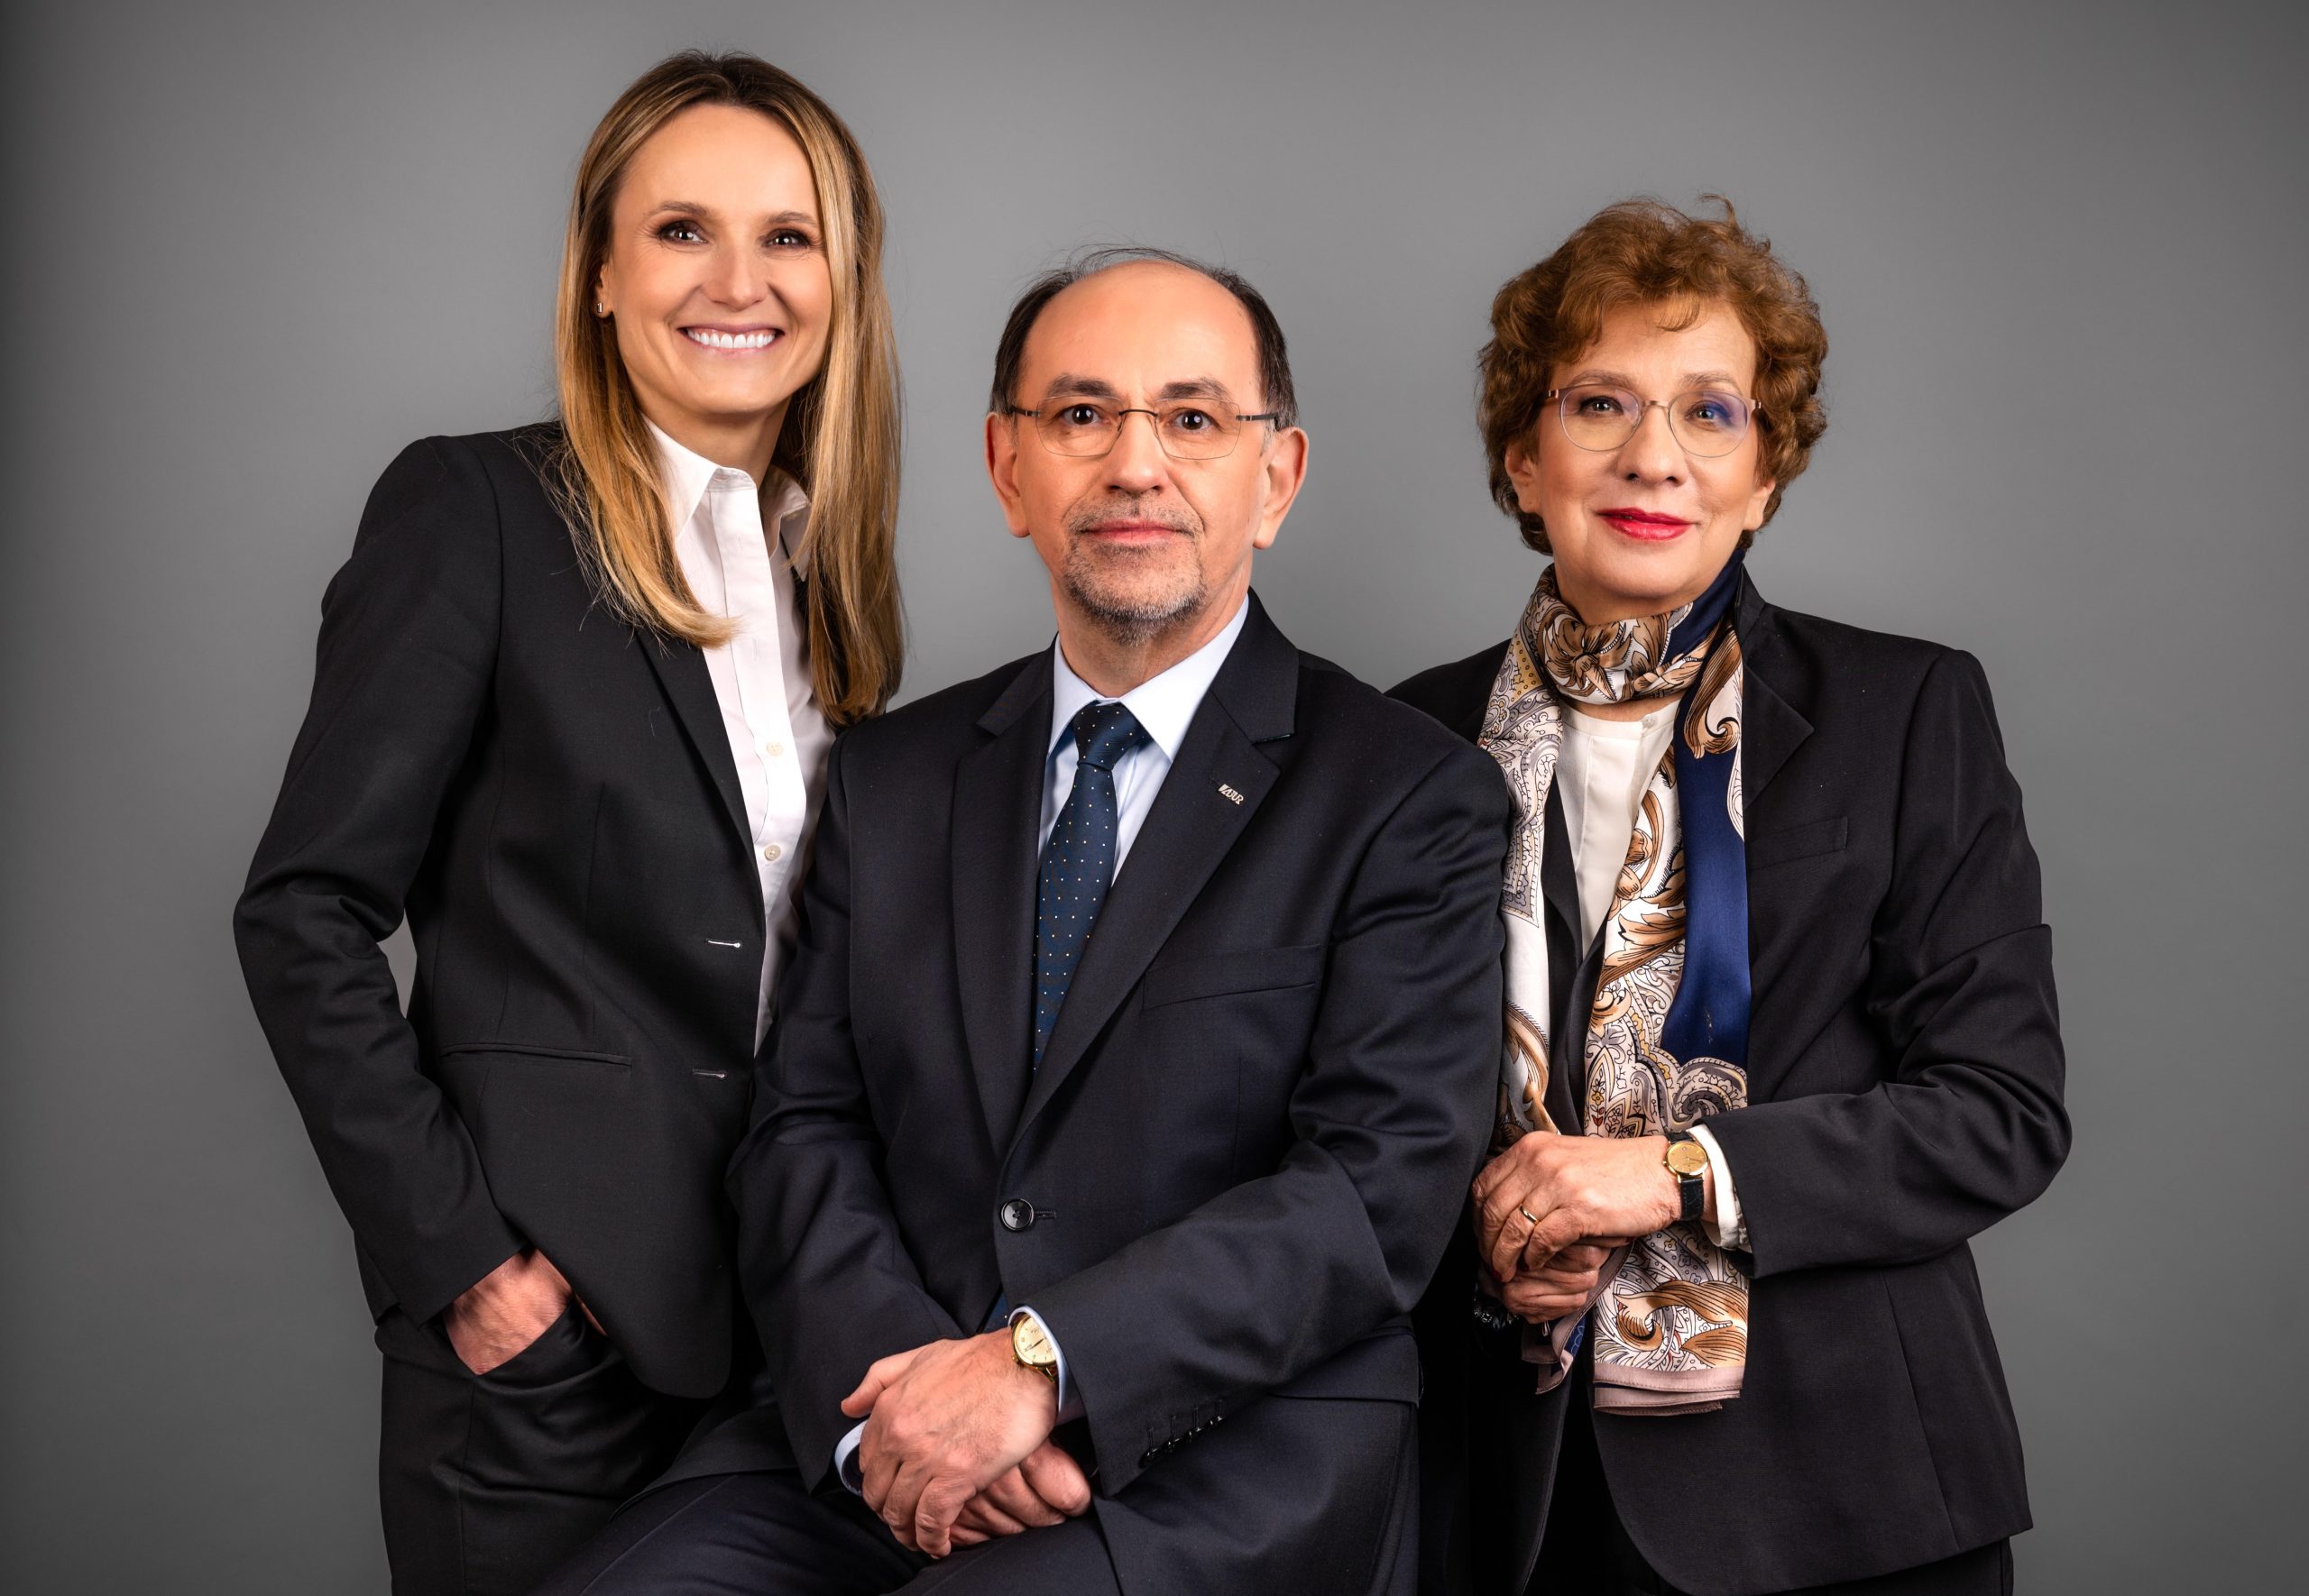 INNOVATION is what makes it possible to distinguish a leader from a follower. Interview with Barbara Wójcicka, Beata Sołtys and Wojciech Znojek, Management Board for SABUR Sp. z o.o.